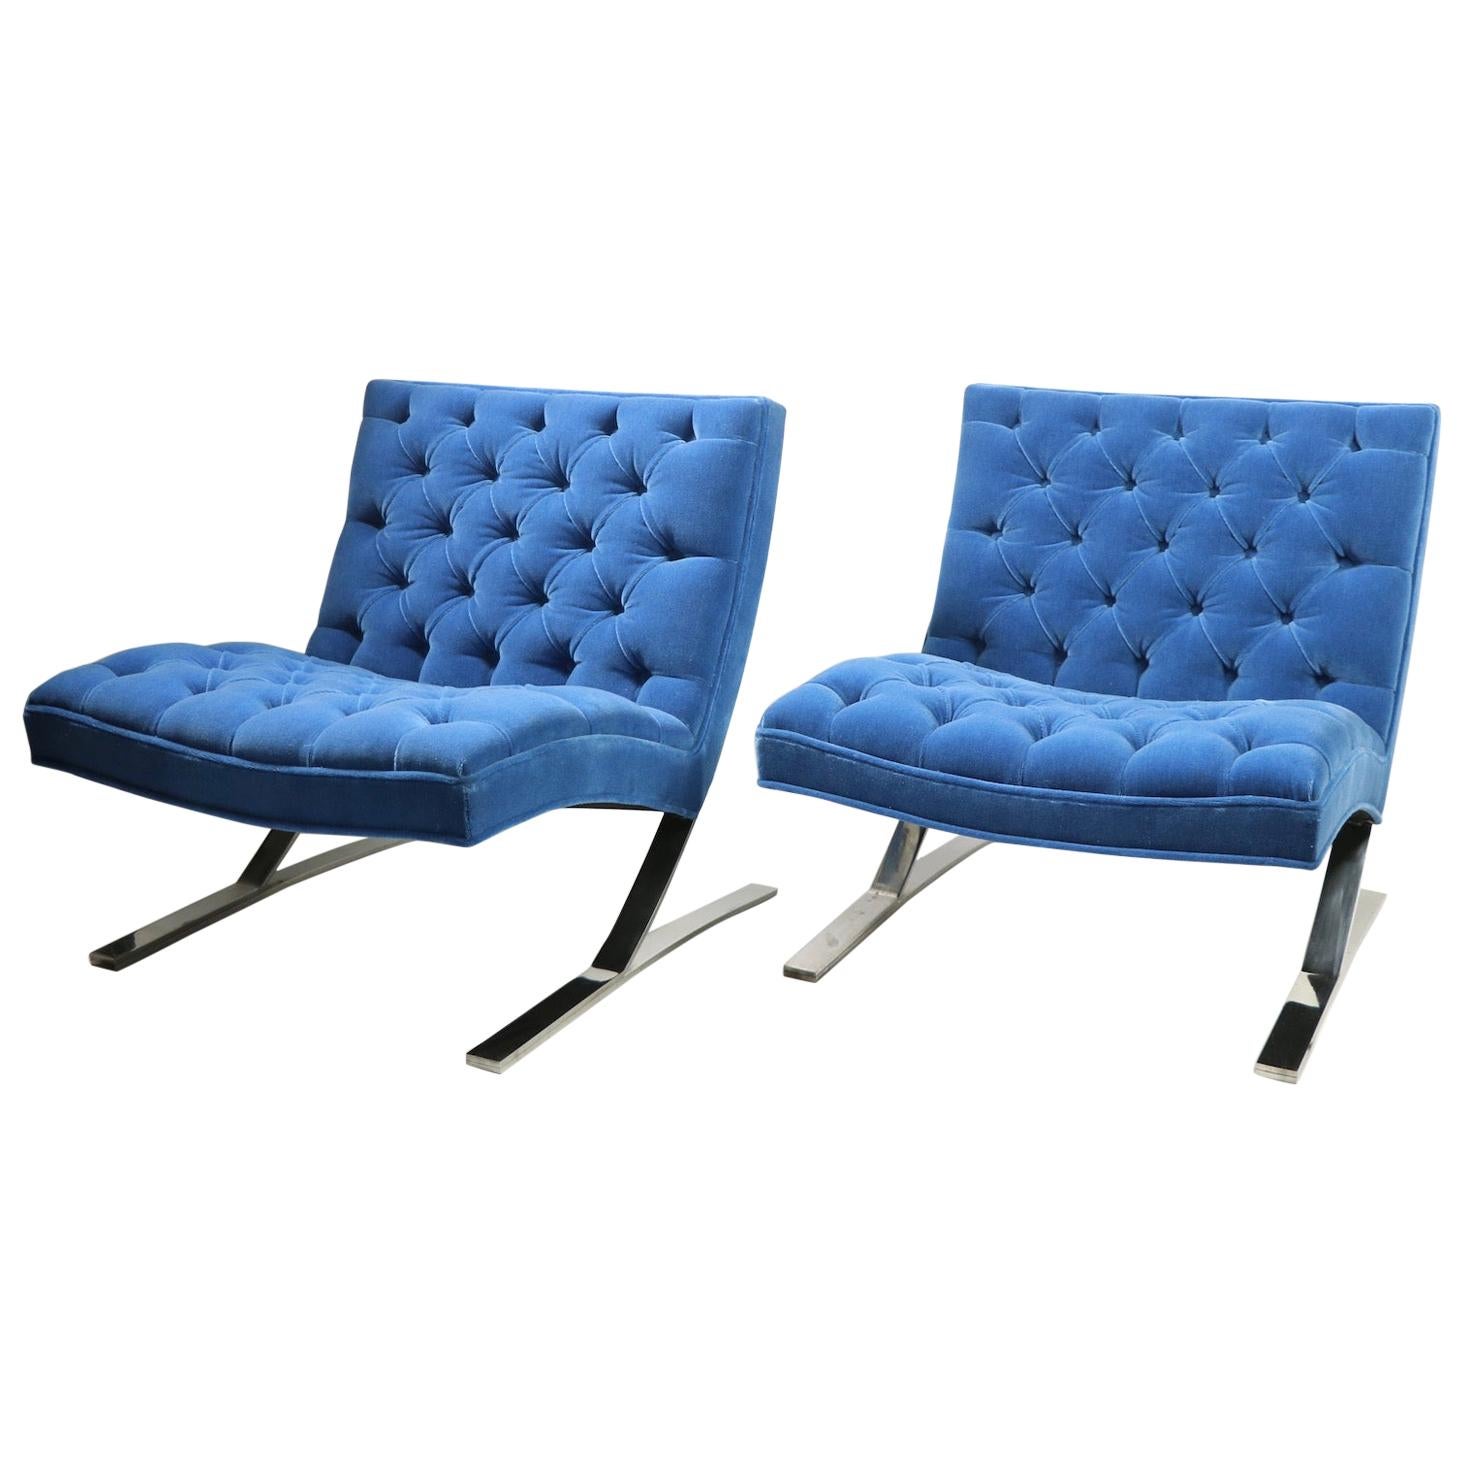 Pair of Barcelona Style Armless Lounge Chairs